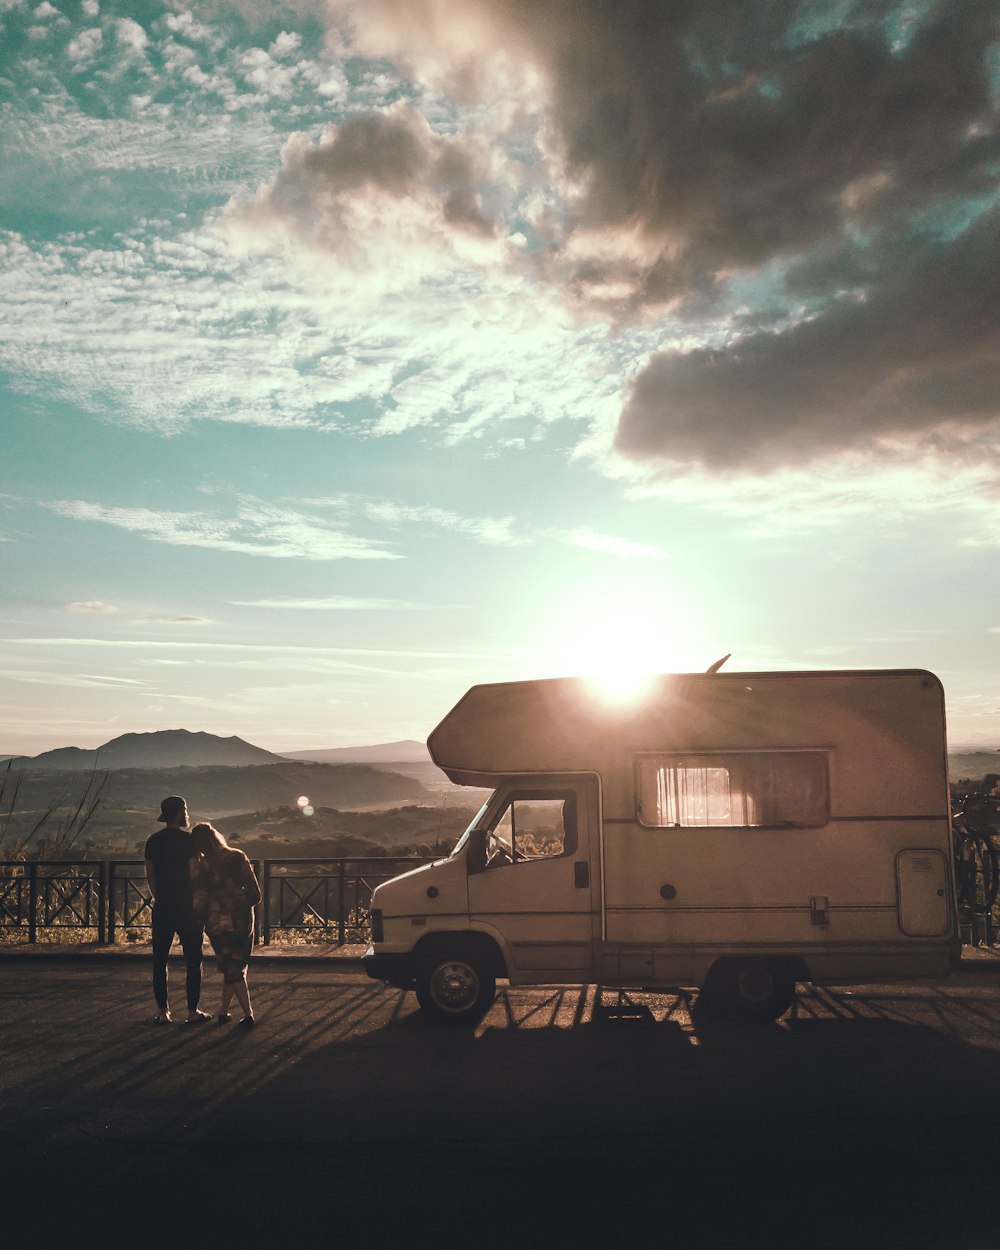 man and woman standing beside camper trailer on the street